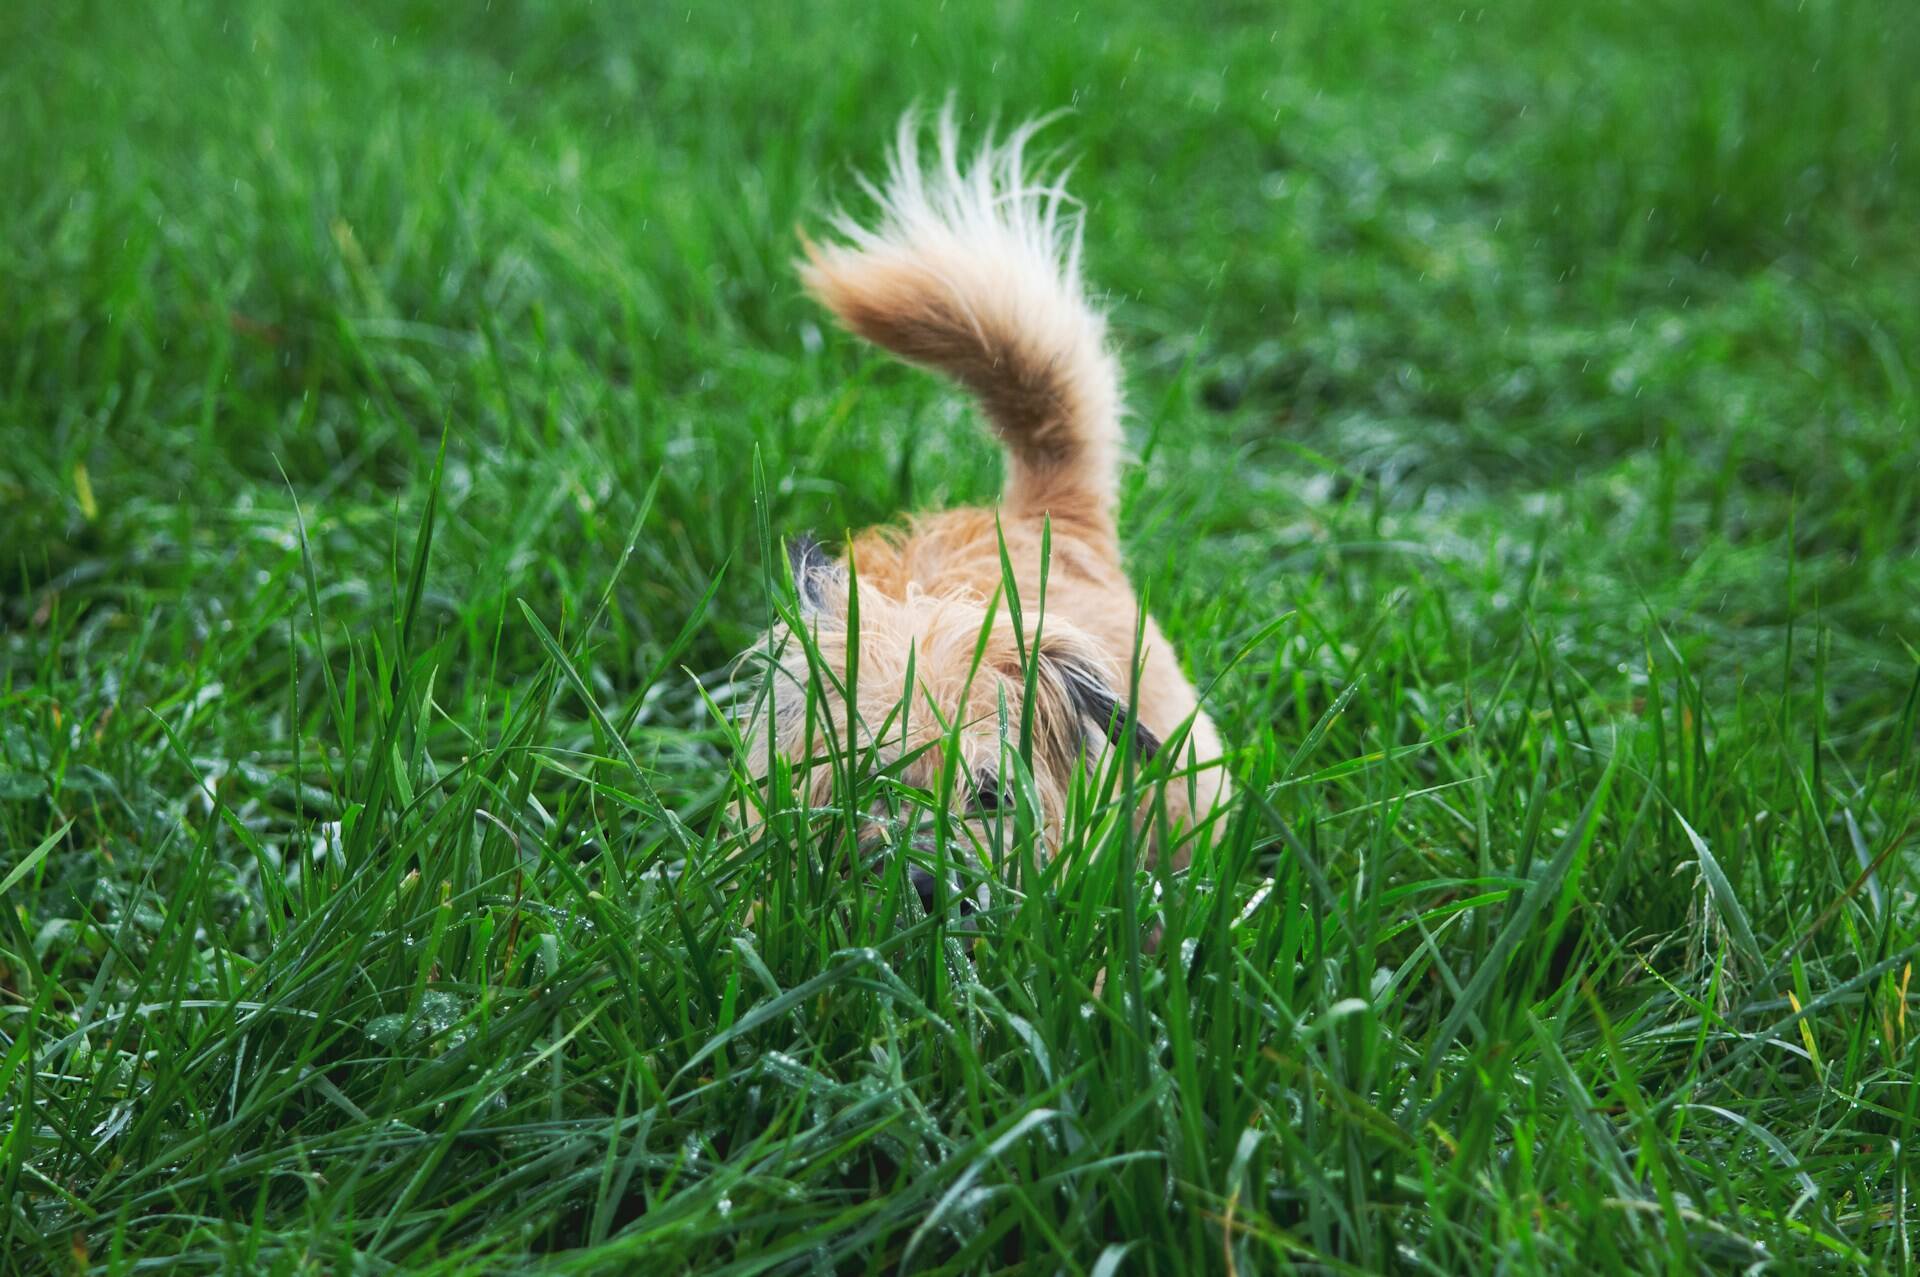 A small dog hiding in the grass